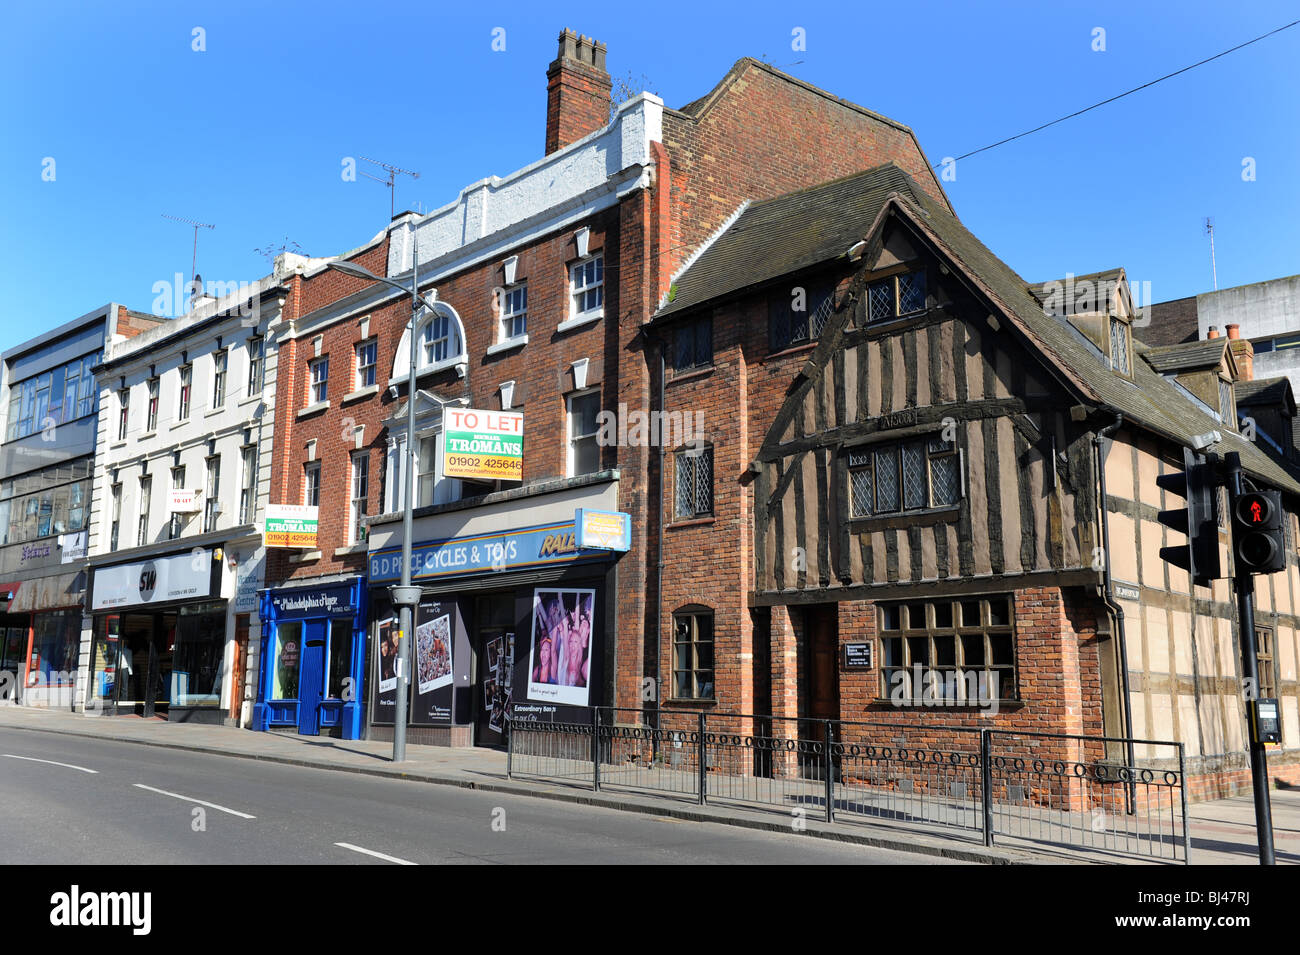 Early 17th century half timbered building in Victoria Street Wolverhampton England Uk Stock Photo